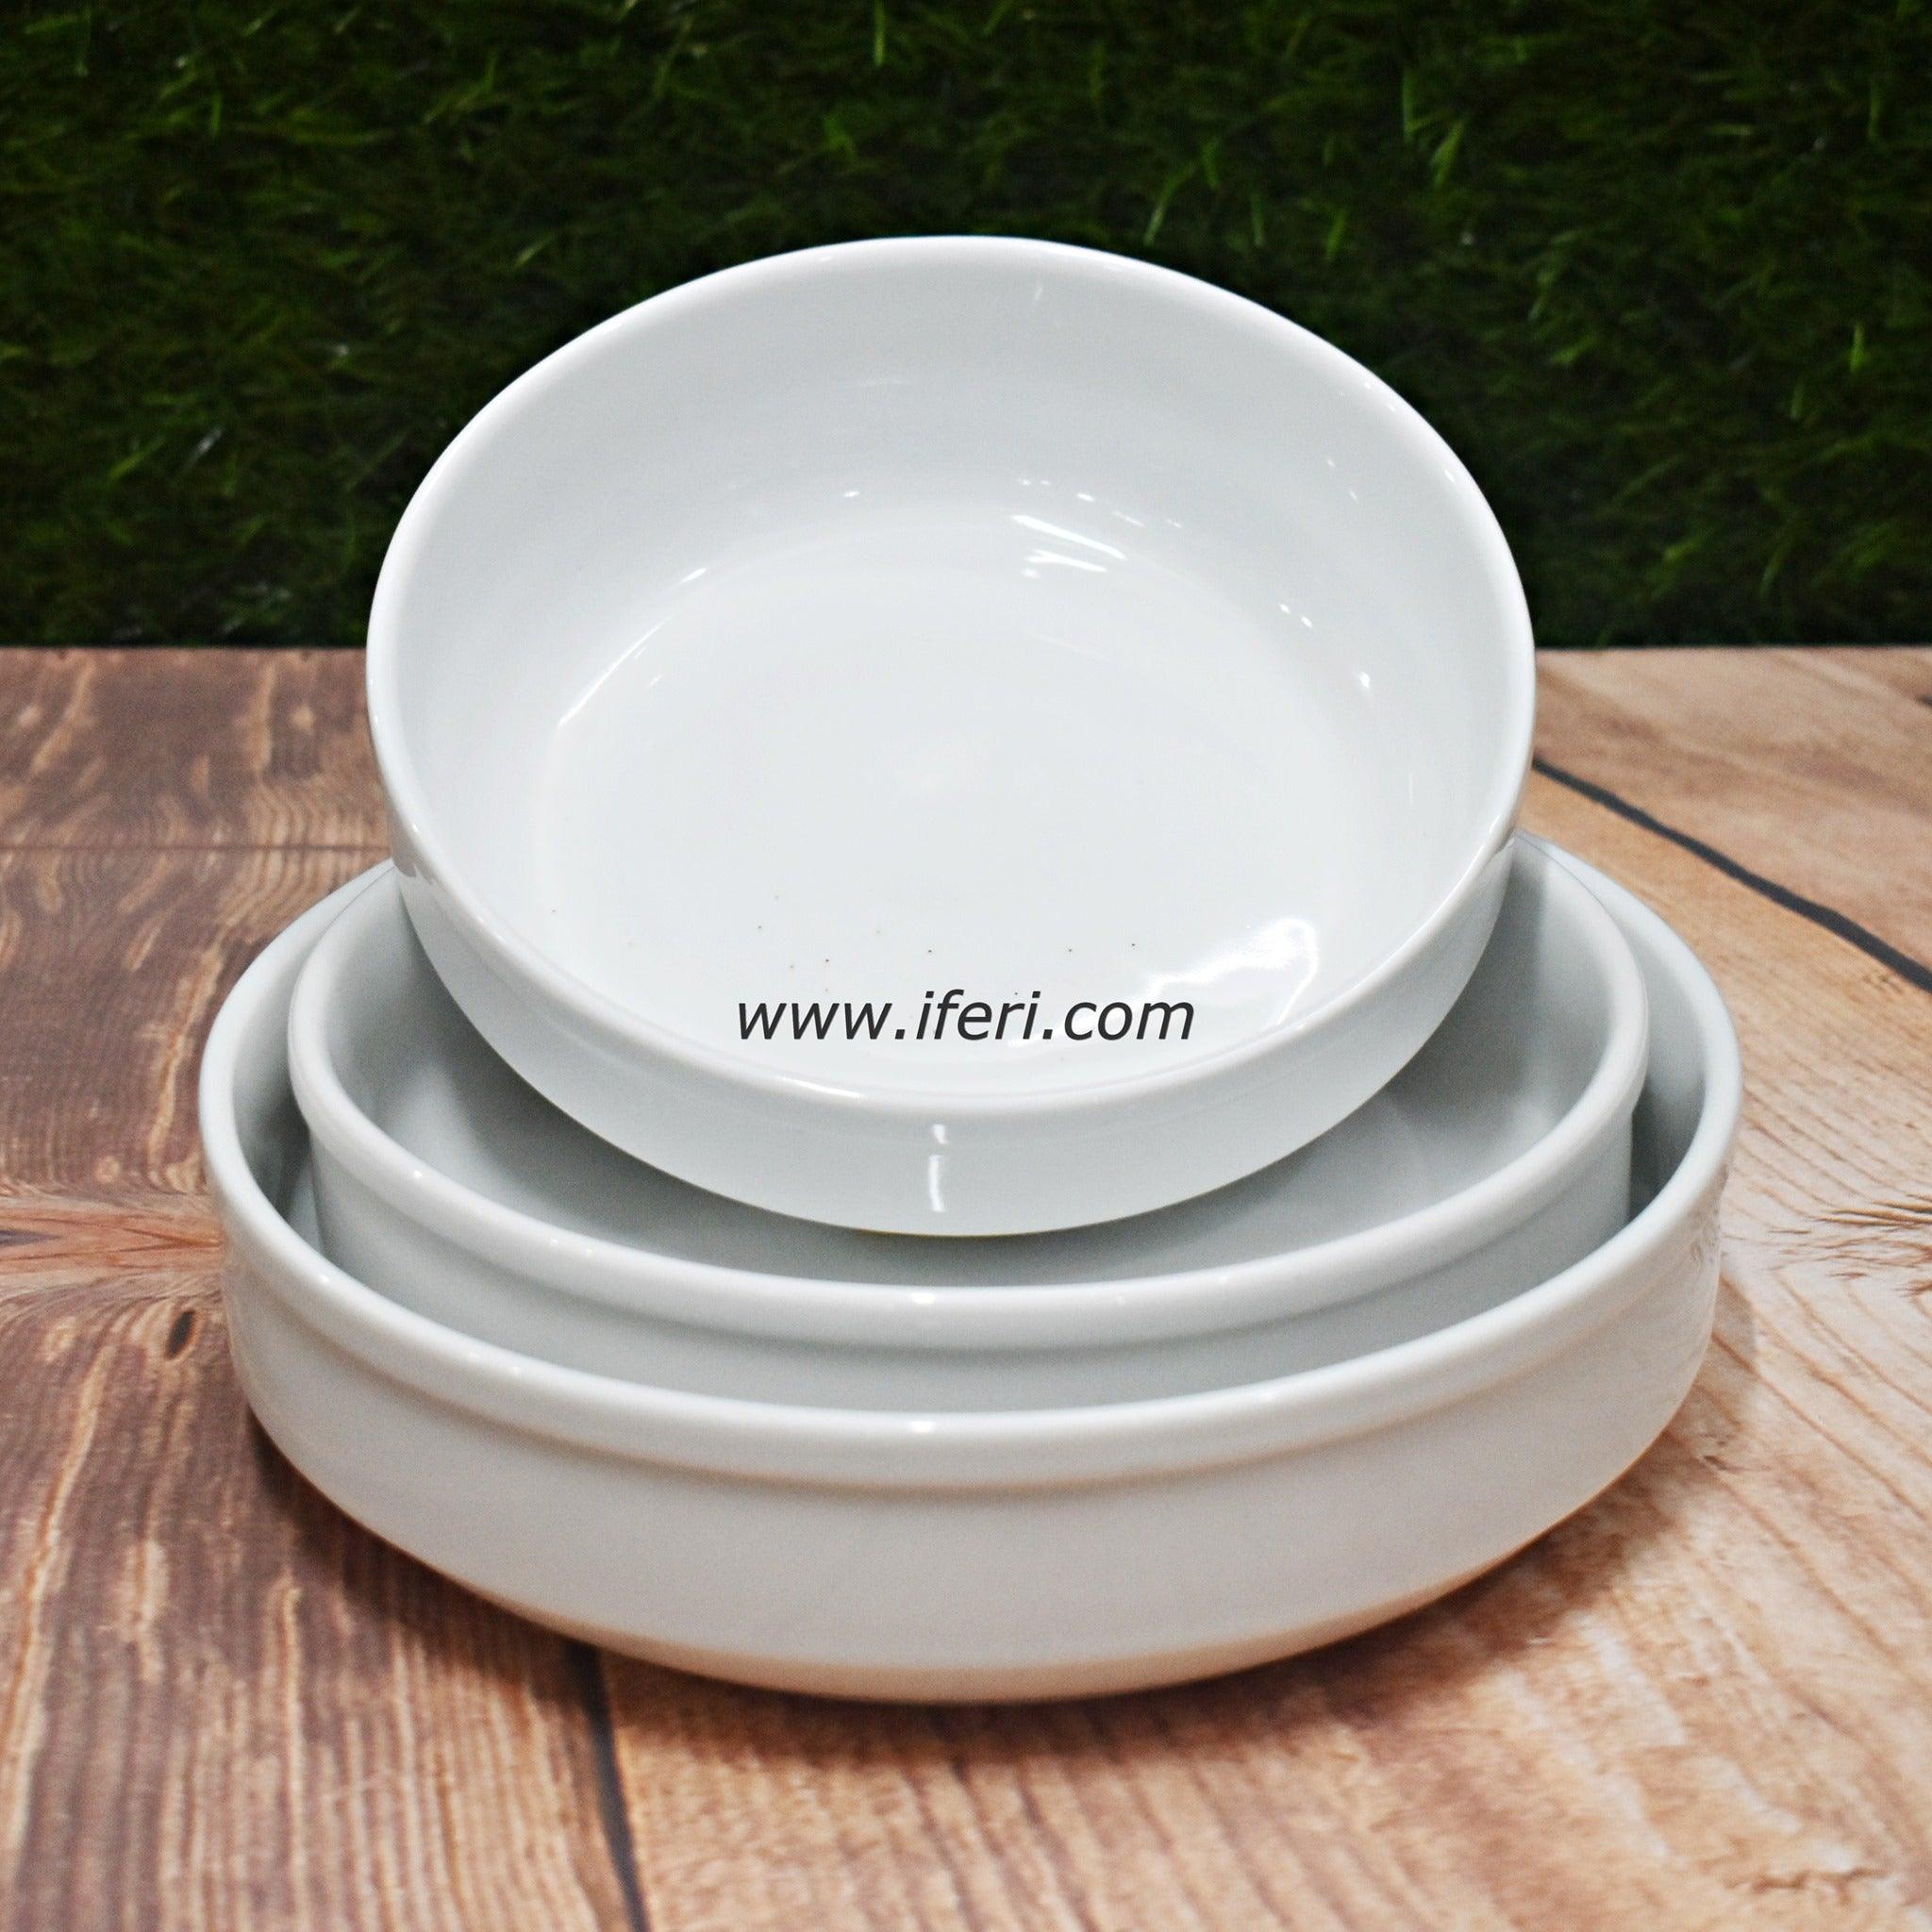 3 Pcs Ceramic Curry Soup Serving Dish Best Online Price in Bangladesh